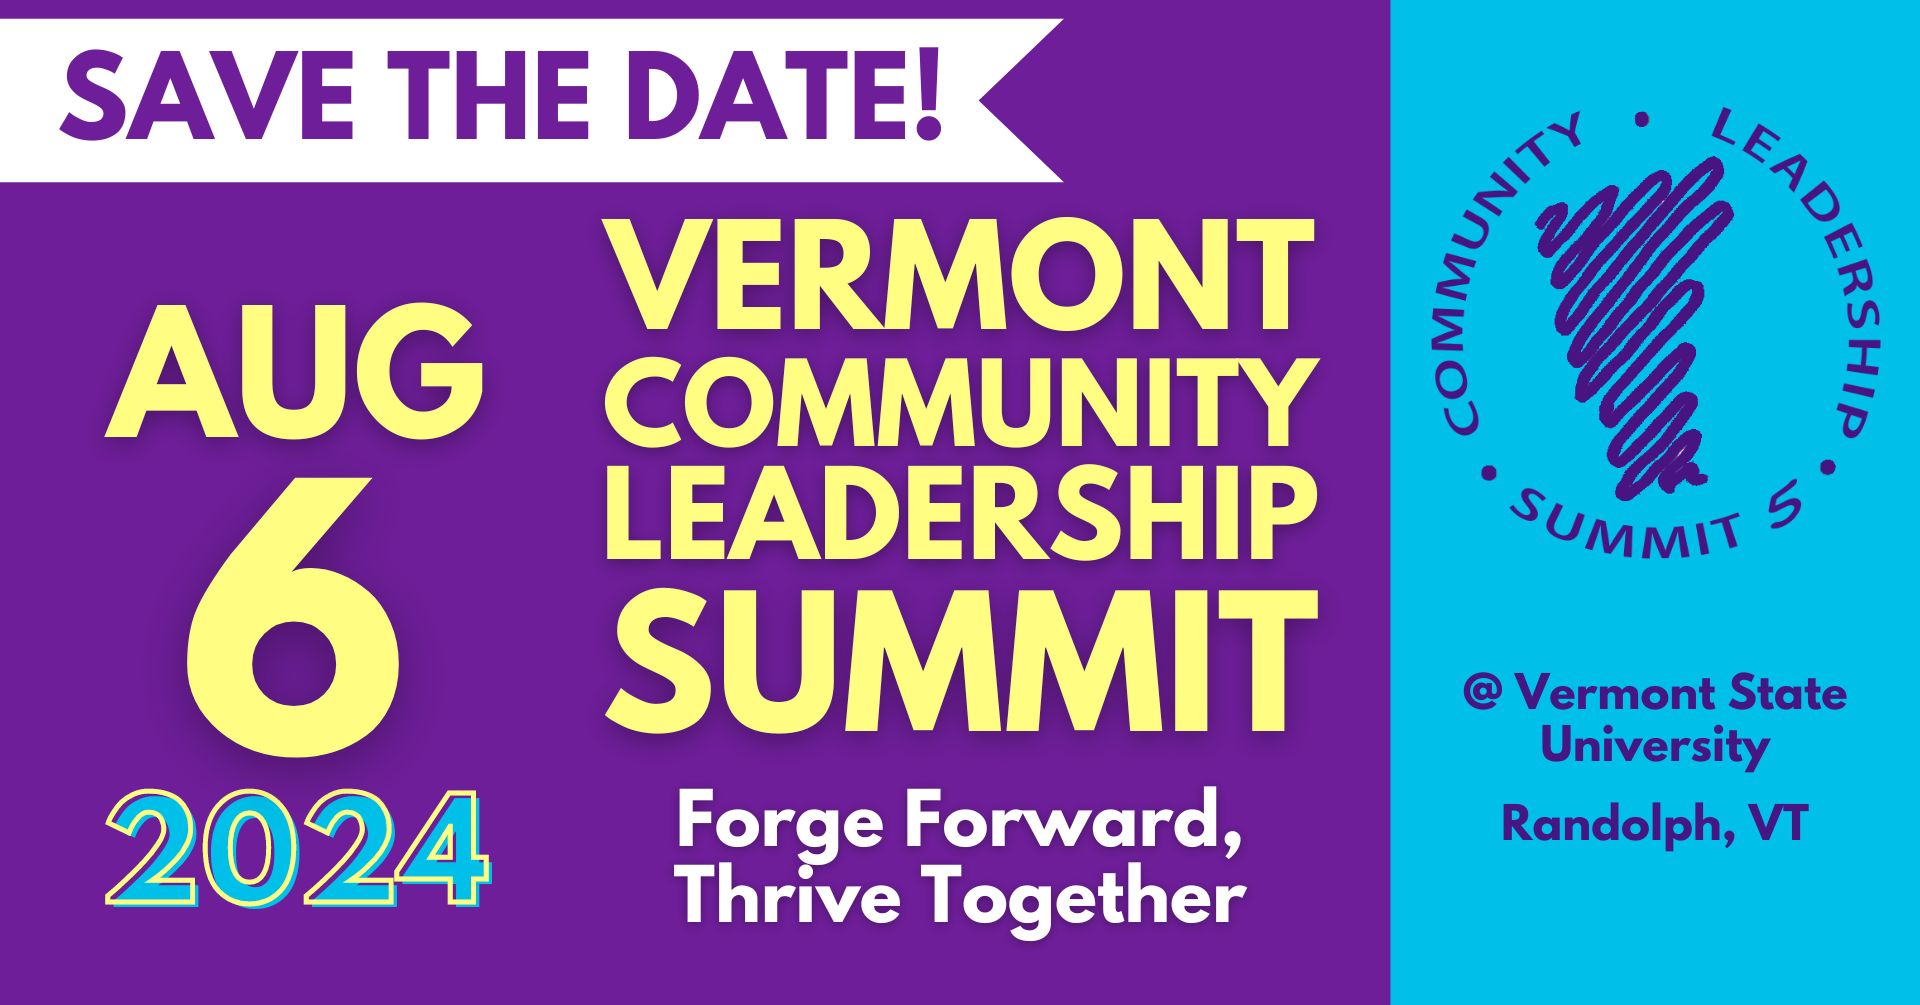 Vermont Community Leadership Summit 2024 Save the Date banner